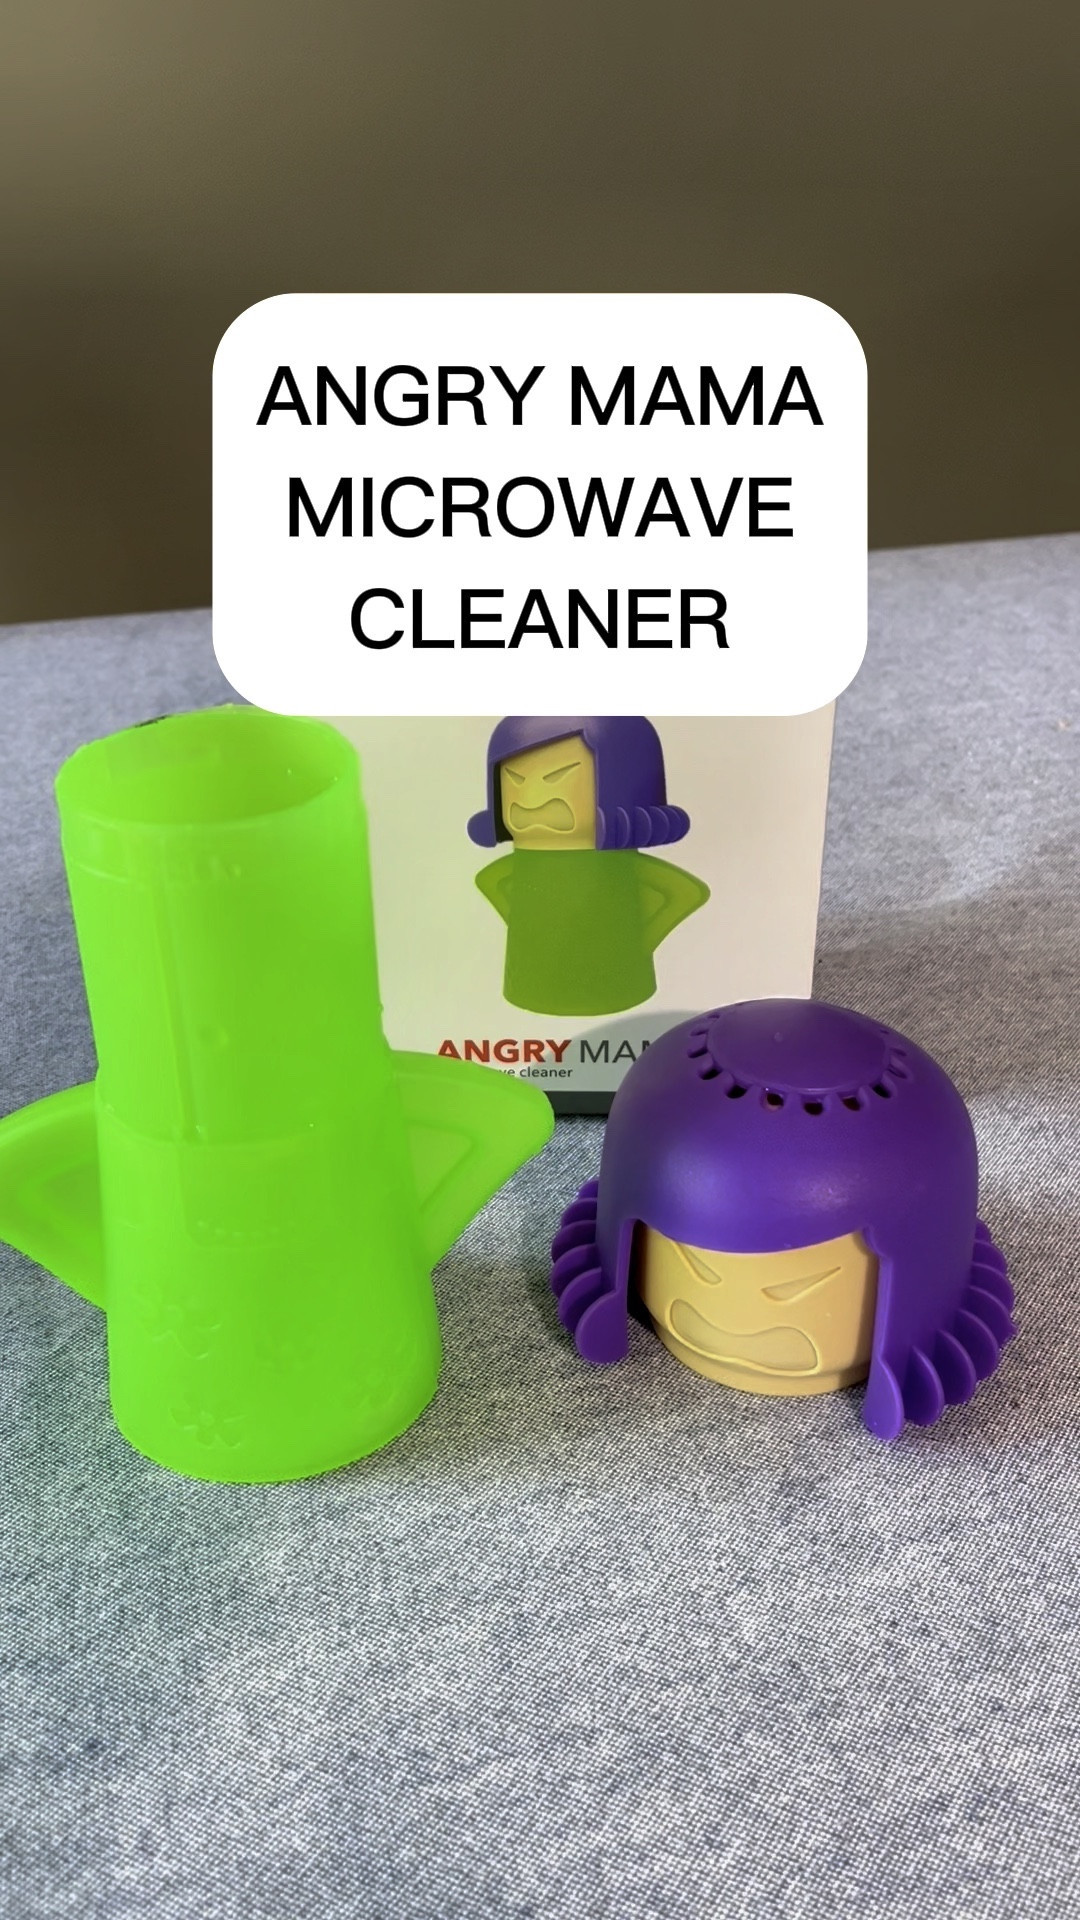  Abnaok Microwave Cleaner, Angry Mama Microwave Cleaner